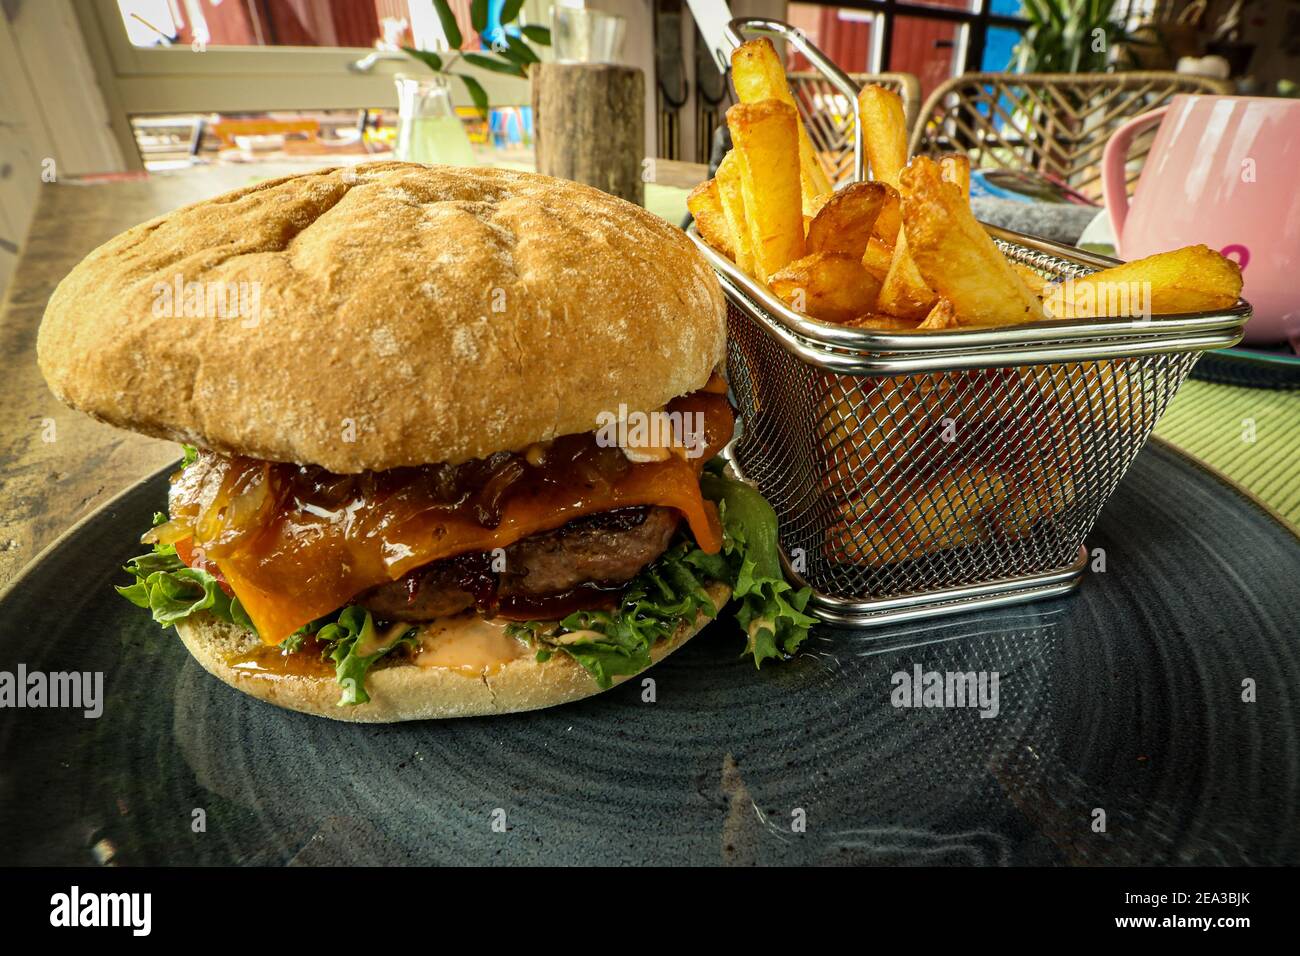 Freshly made burger with basket of French fries in Norway September 2020 Stock Photo